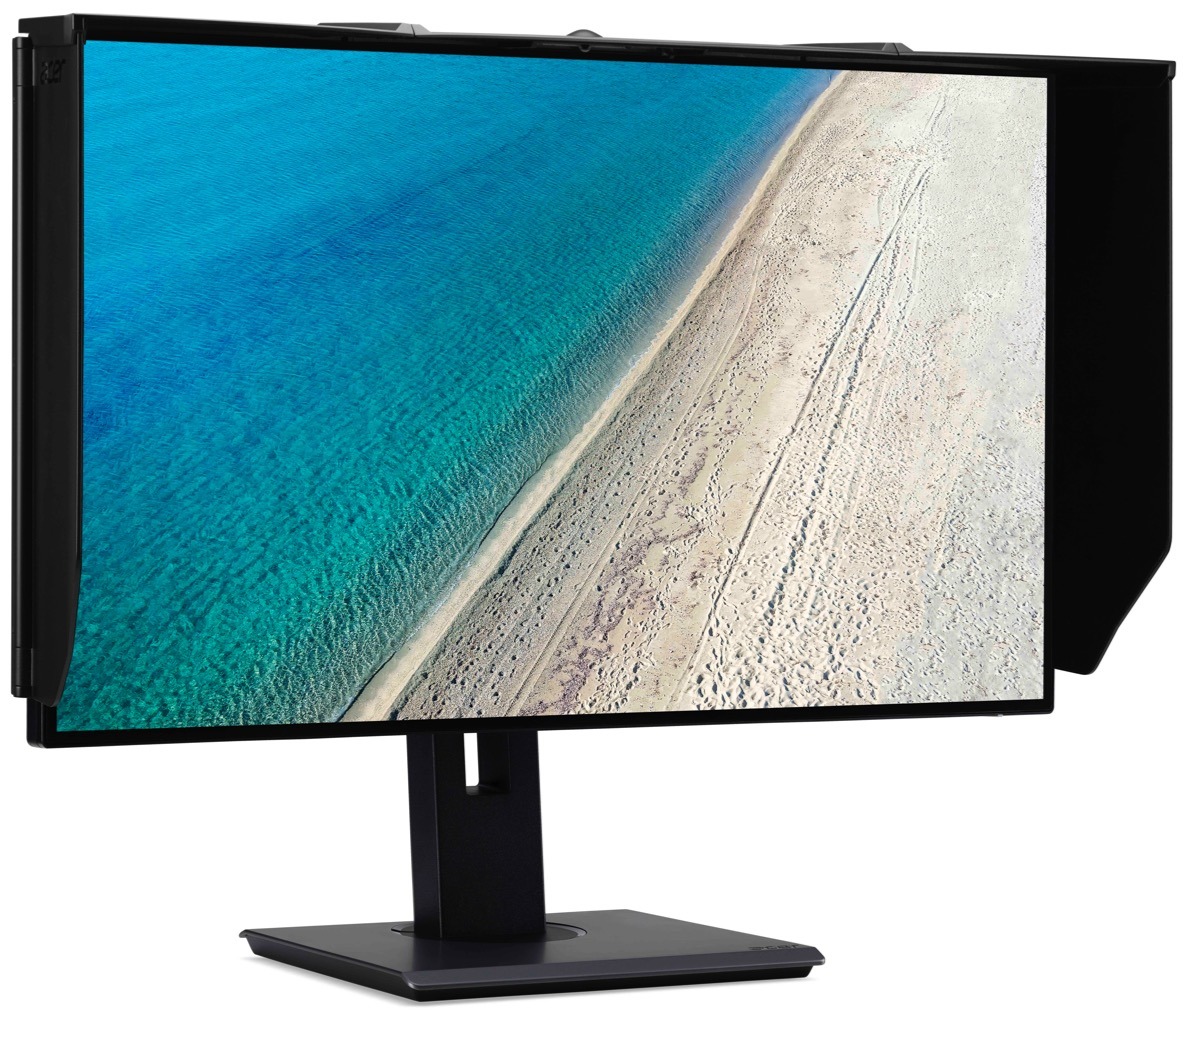 photo of Acer announces USB-C 4K display geared towards professional image editor's needs image